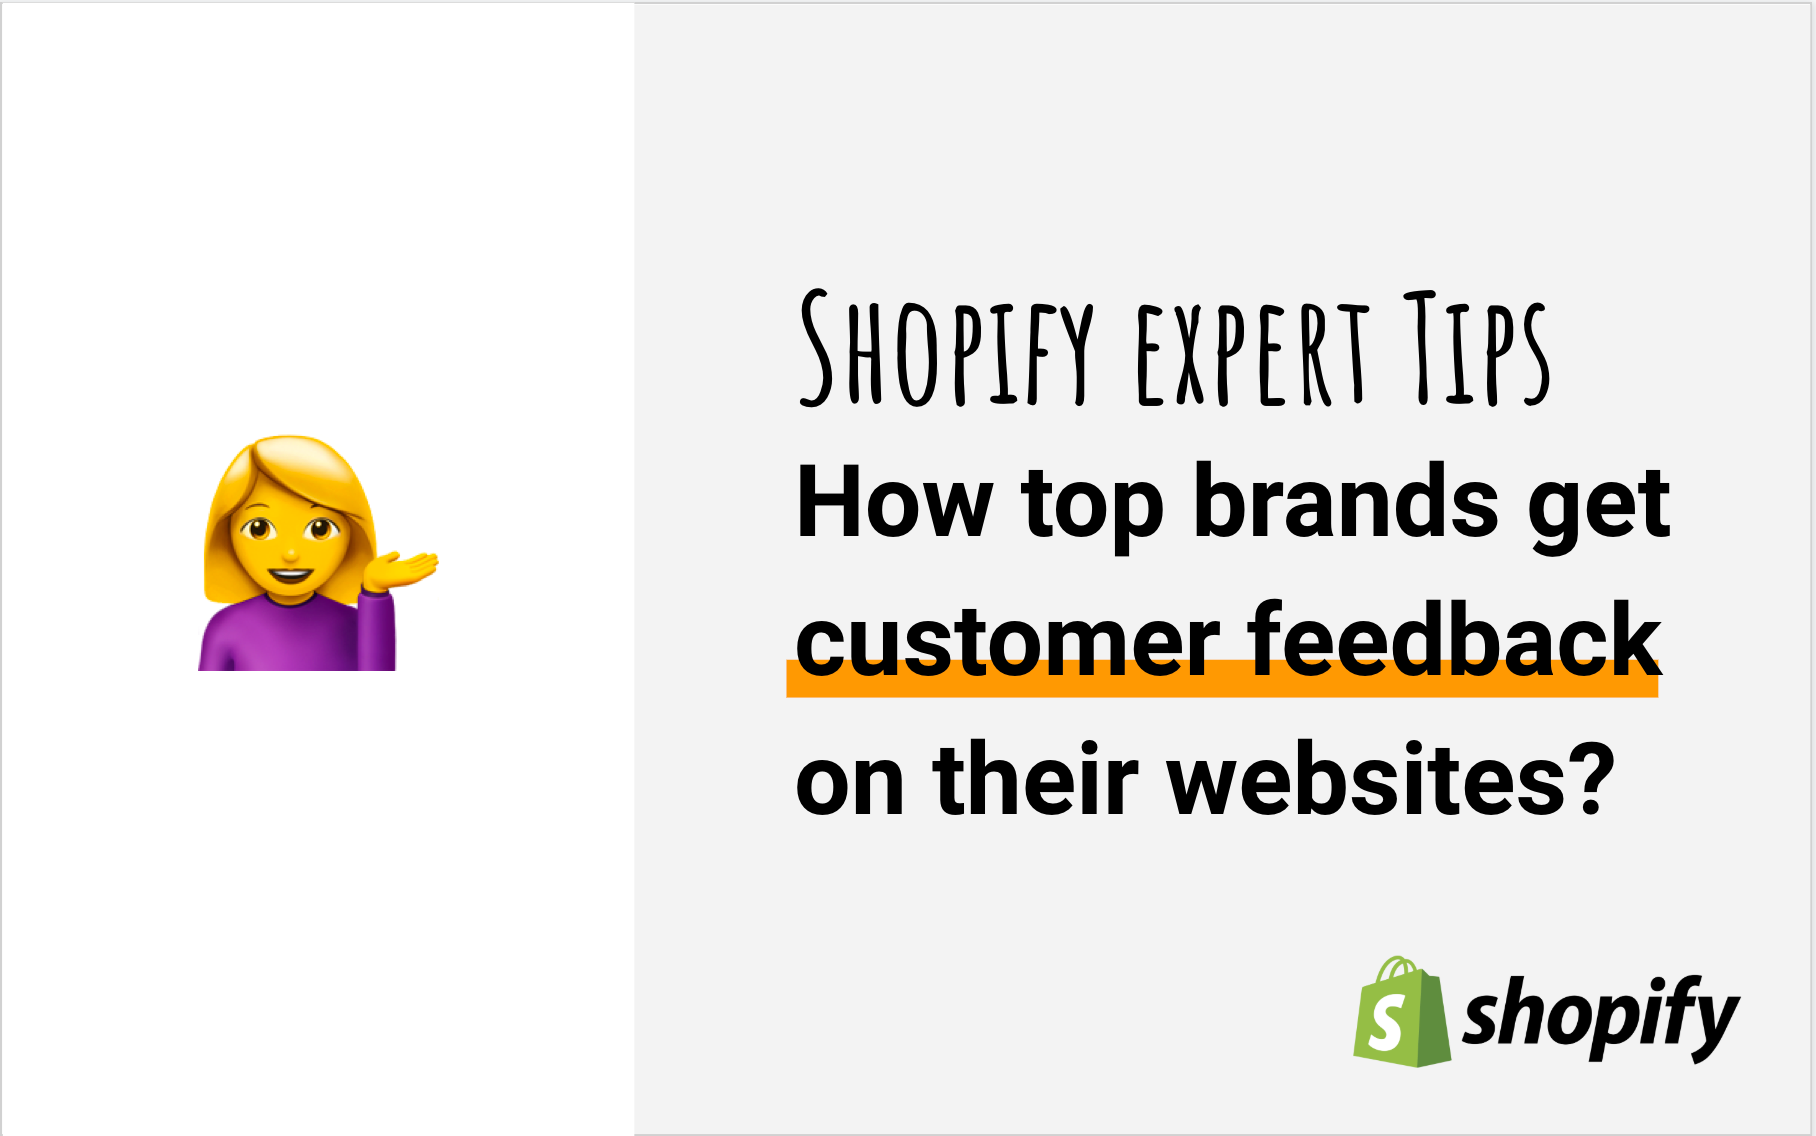 Shopify Expert Tips: How top brands get customer feedback on their websites